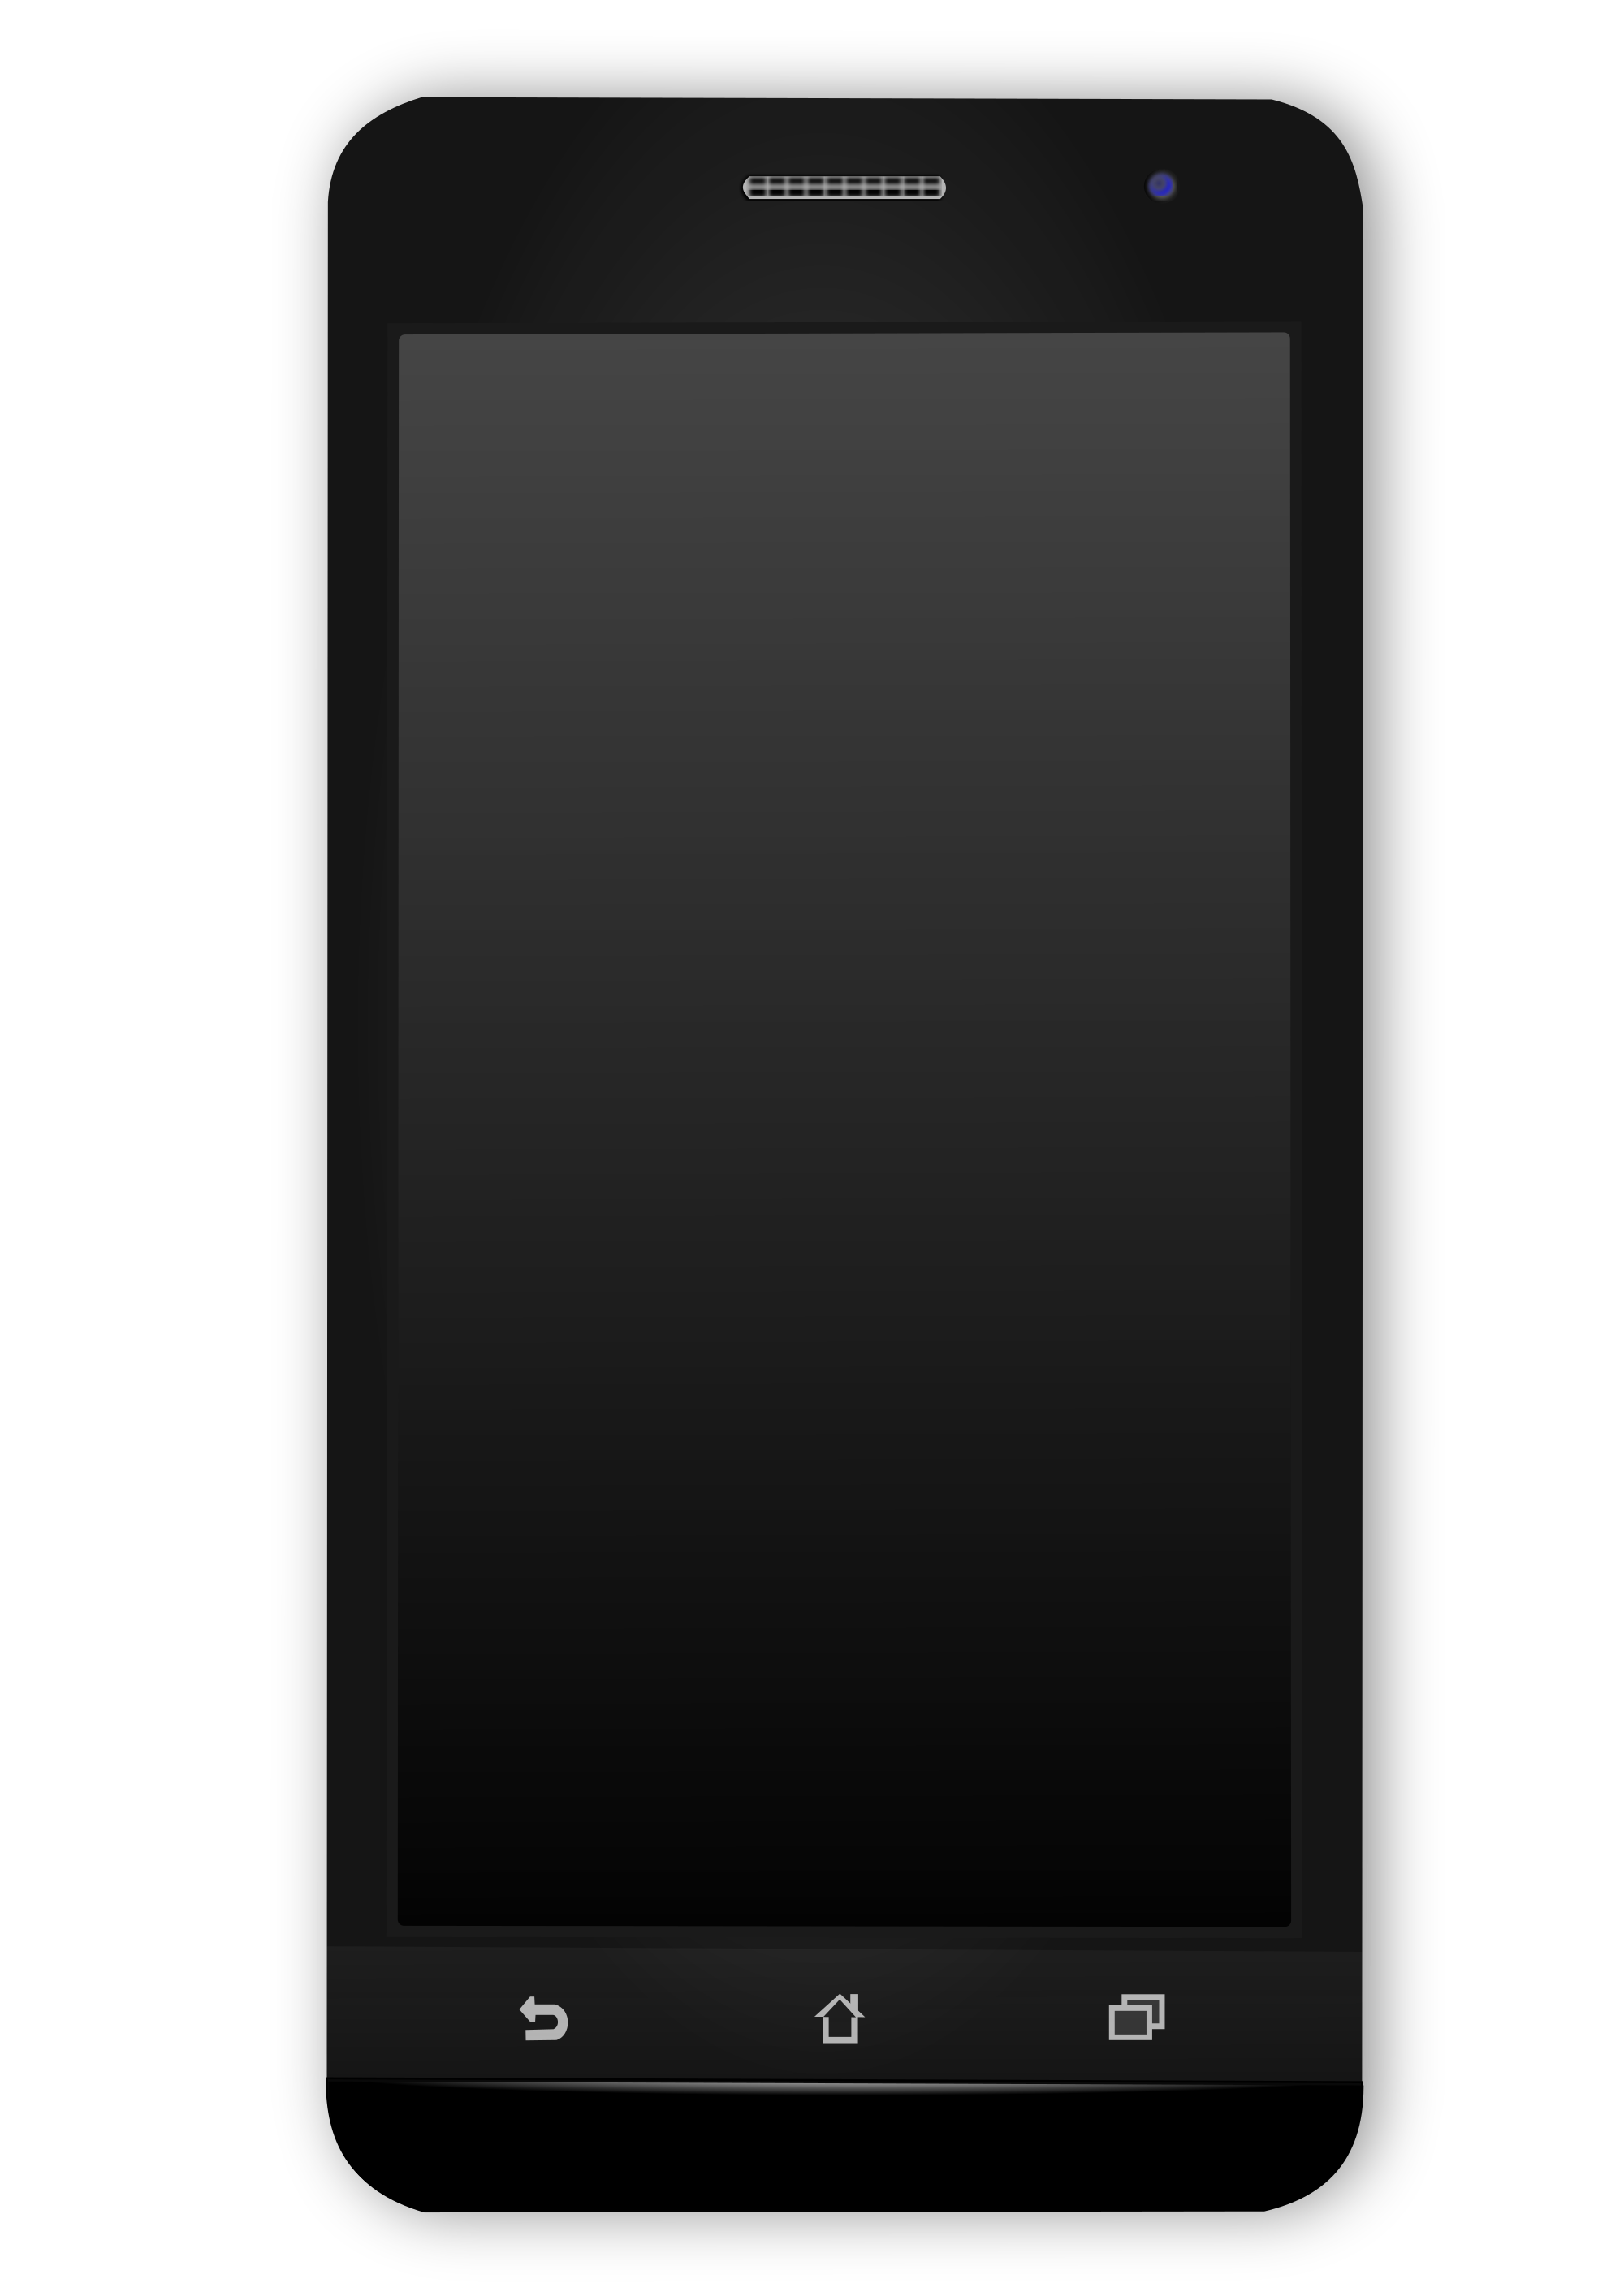 File:Black-android-phone.svg - Wikimedia Commons